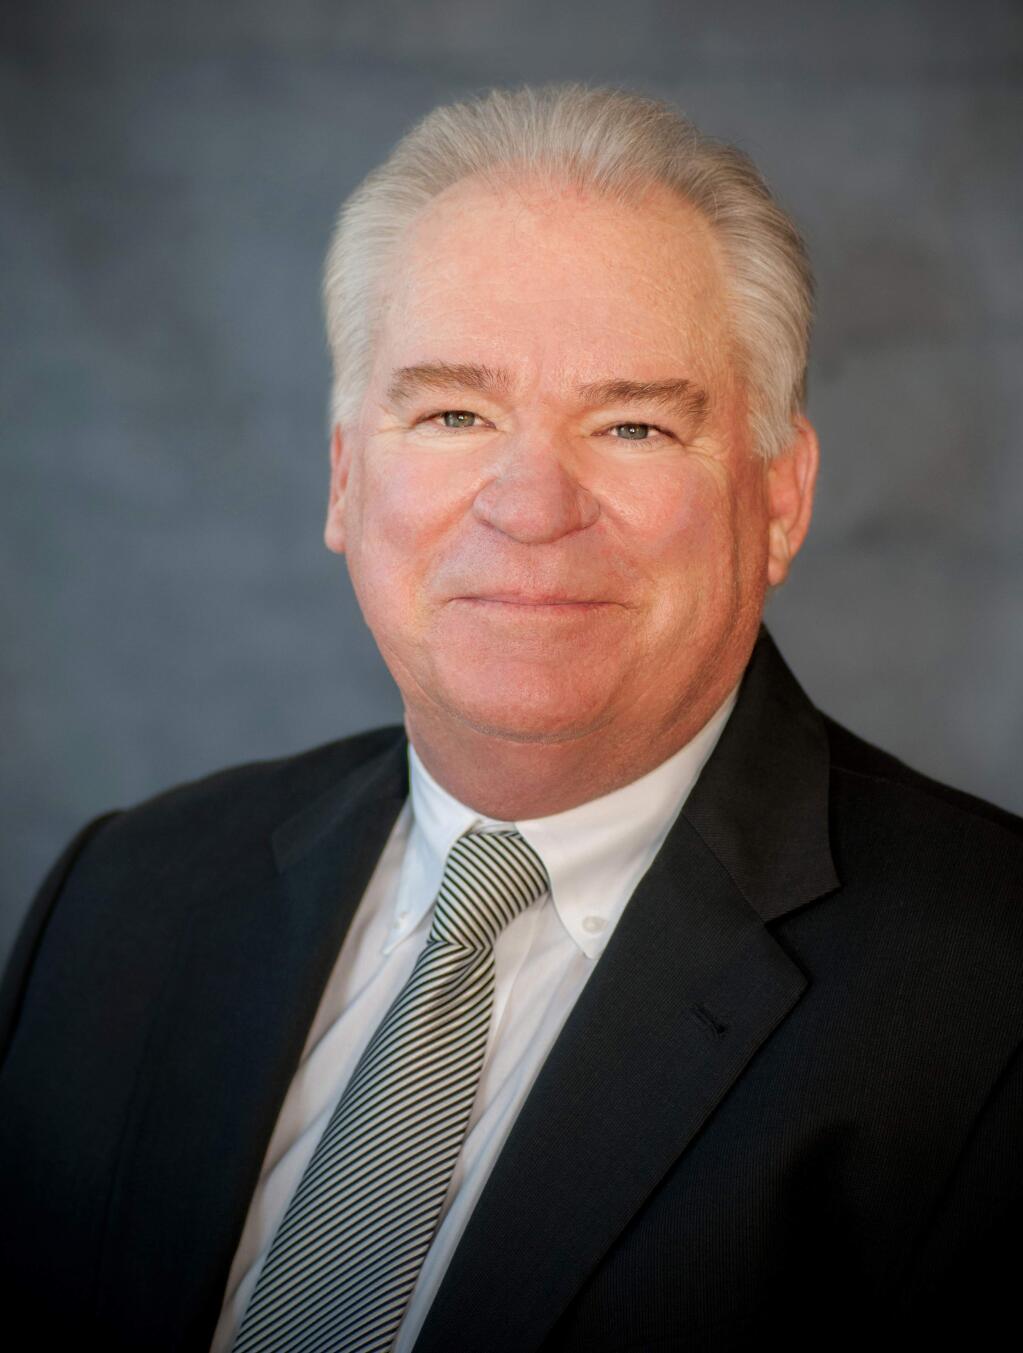 Joe O'Hehir, CEO of the nonprofit Whistlestop based in San Rafael, plans to retire in February 2021. (courtesy photo)